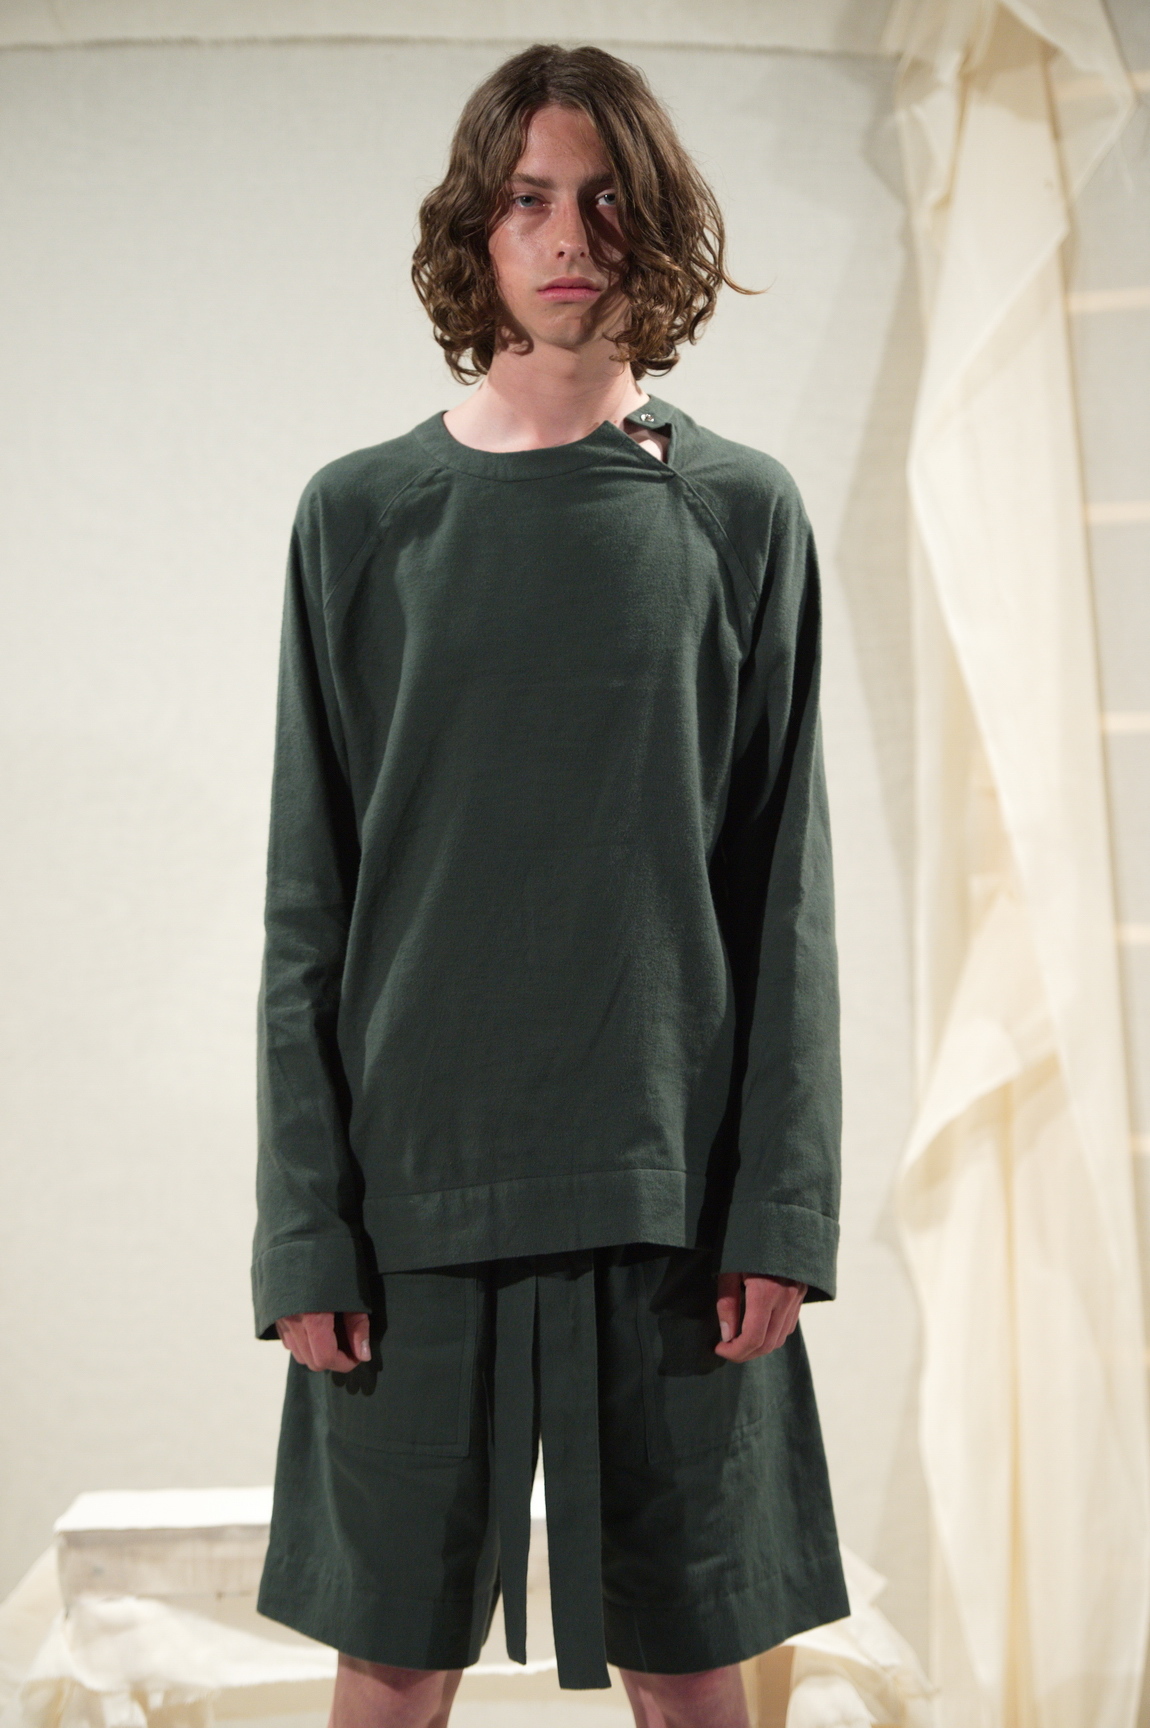 sew fresh: phoebe english makes her london collections: men debut - i-D